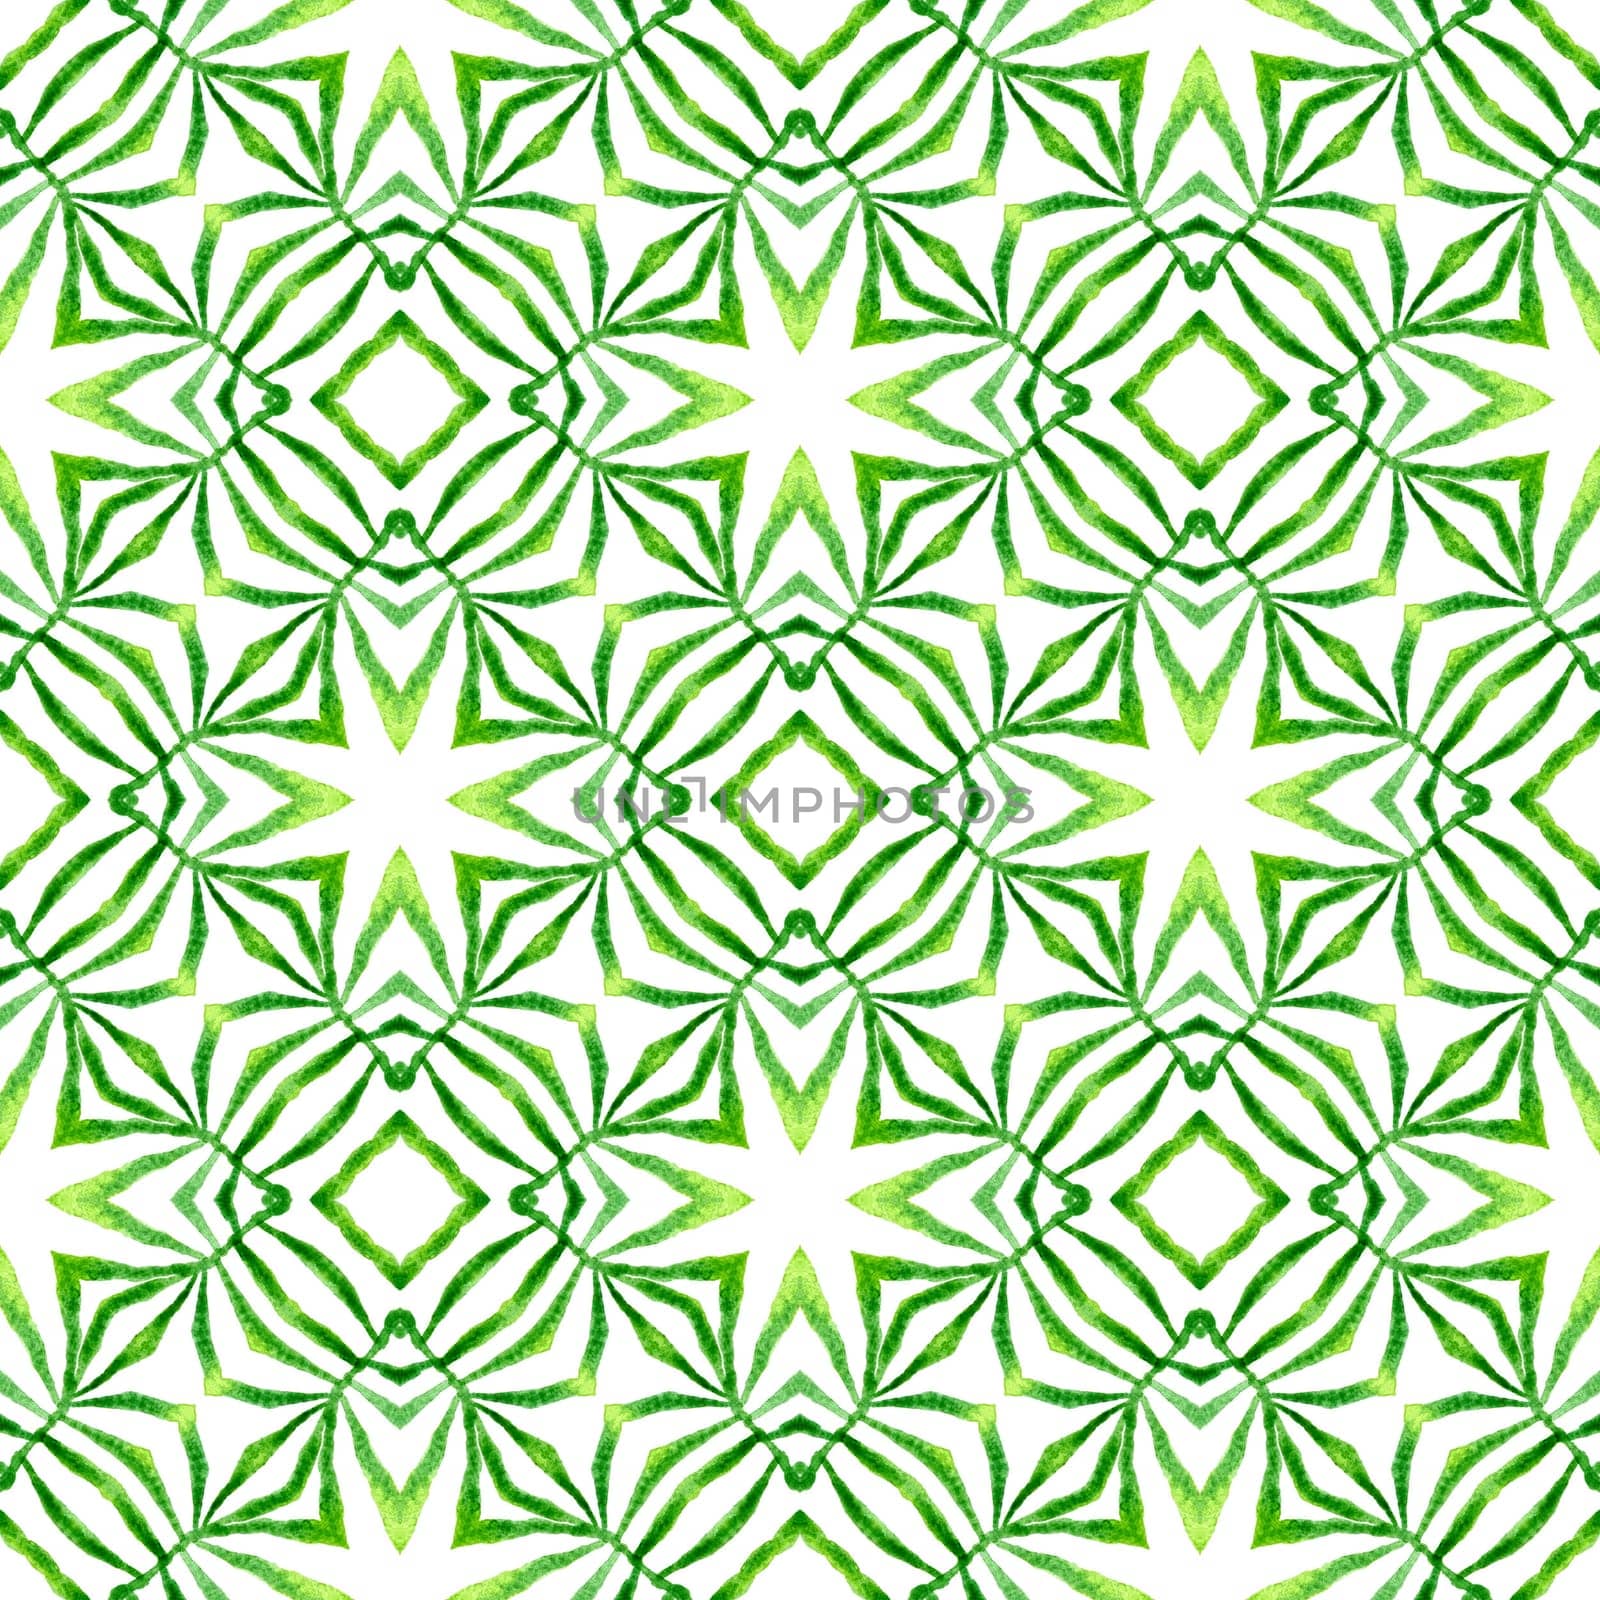 Ethnic hand painted pattern. Green curious boho by beginagain